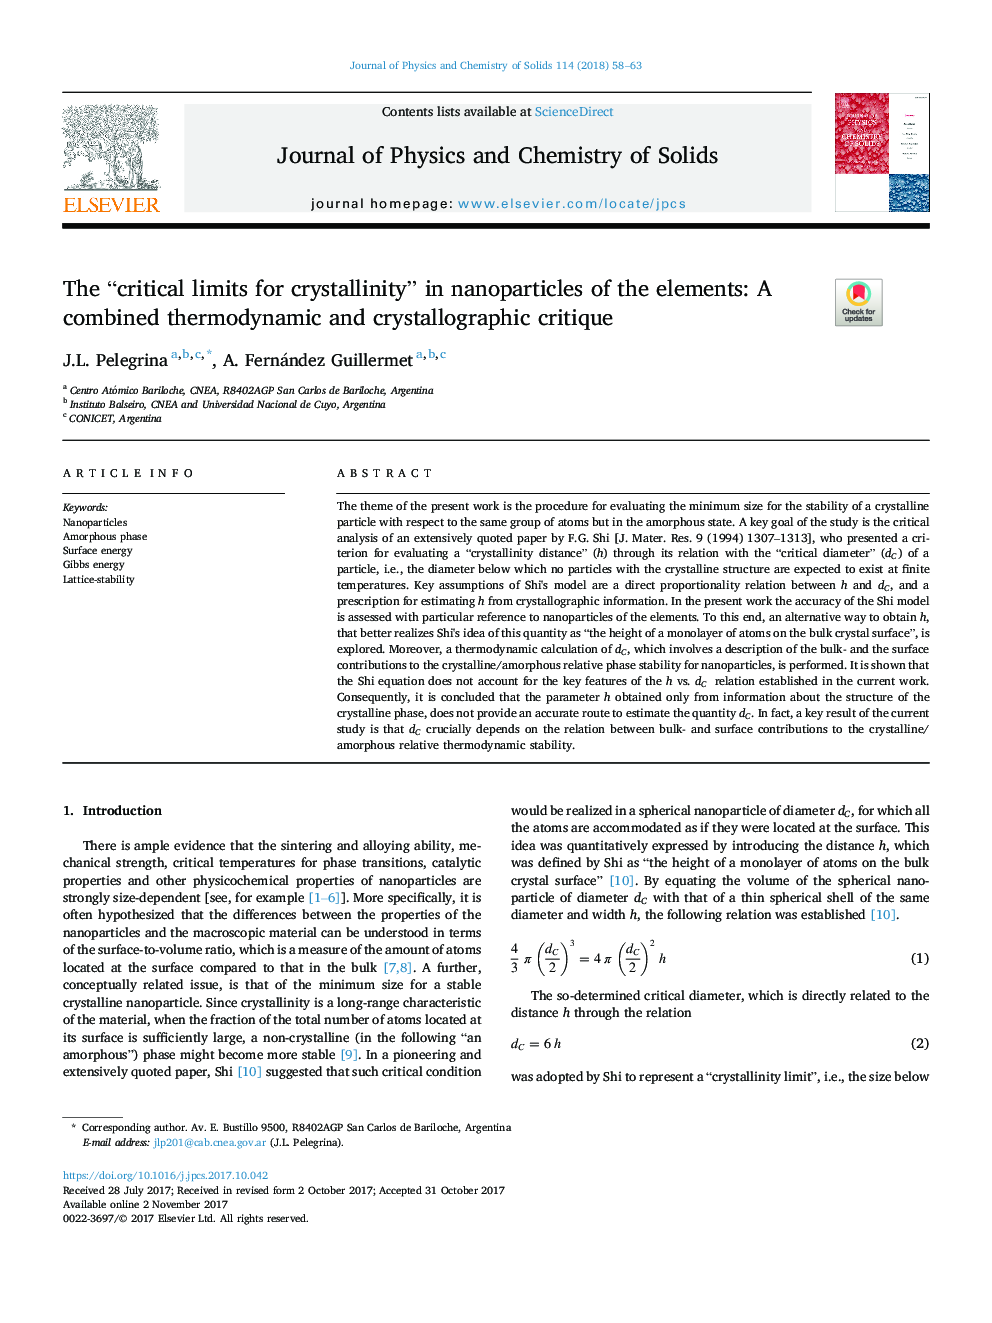 The “critical limits for crystallinity” in nanoparticles of the elements: A combined thermodynamic and crystallographic critique